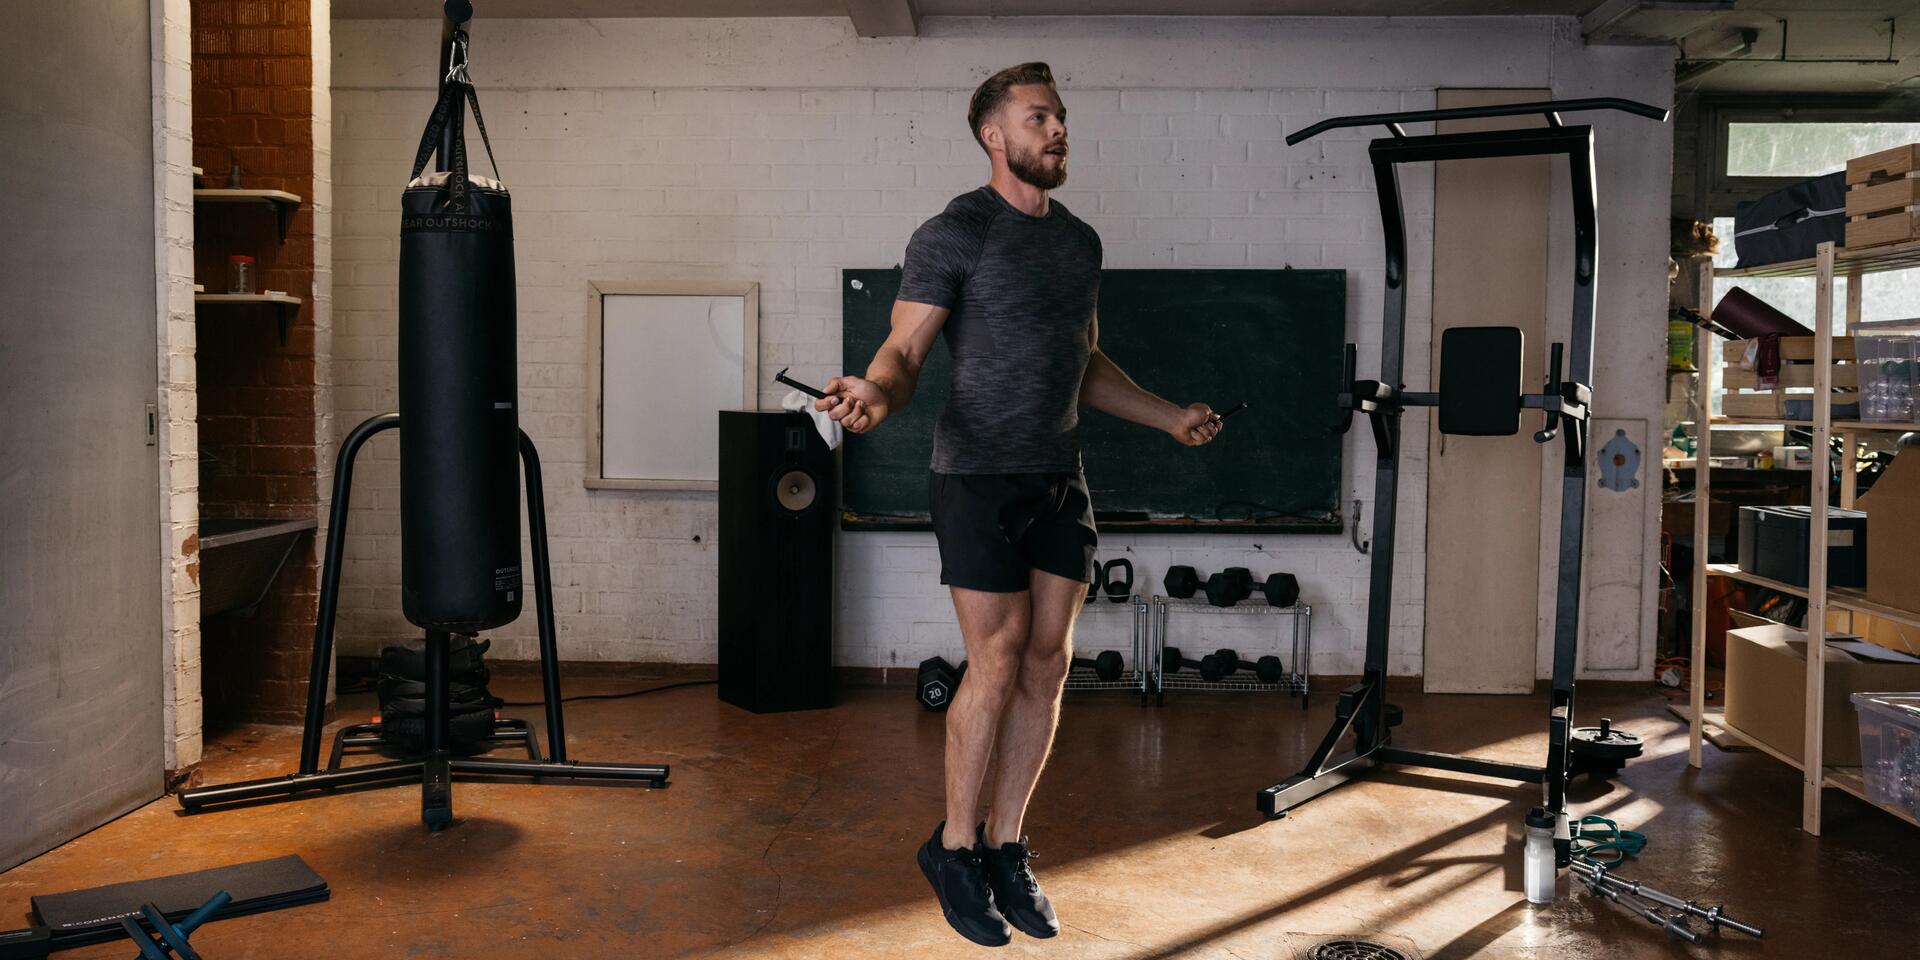 Man skipping rope in home gym. 